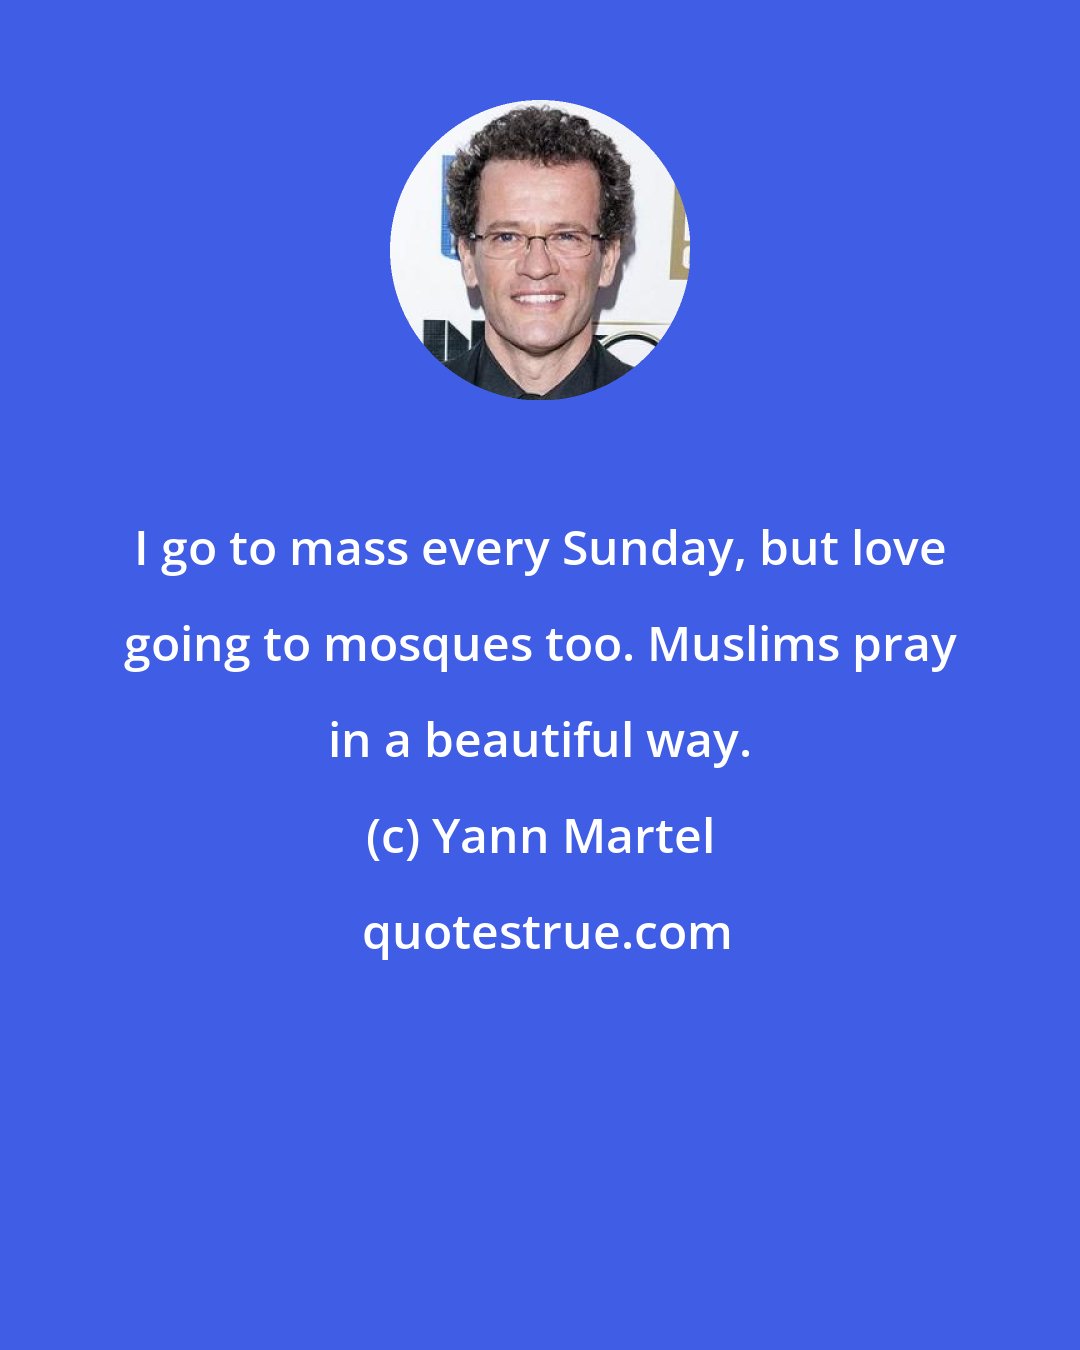 Yann Martel: I go to mass every Sunday, but love going to mosques too. Muslims pray in a beautiful way.